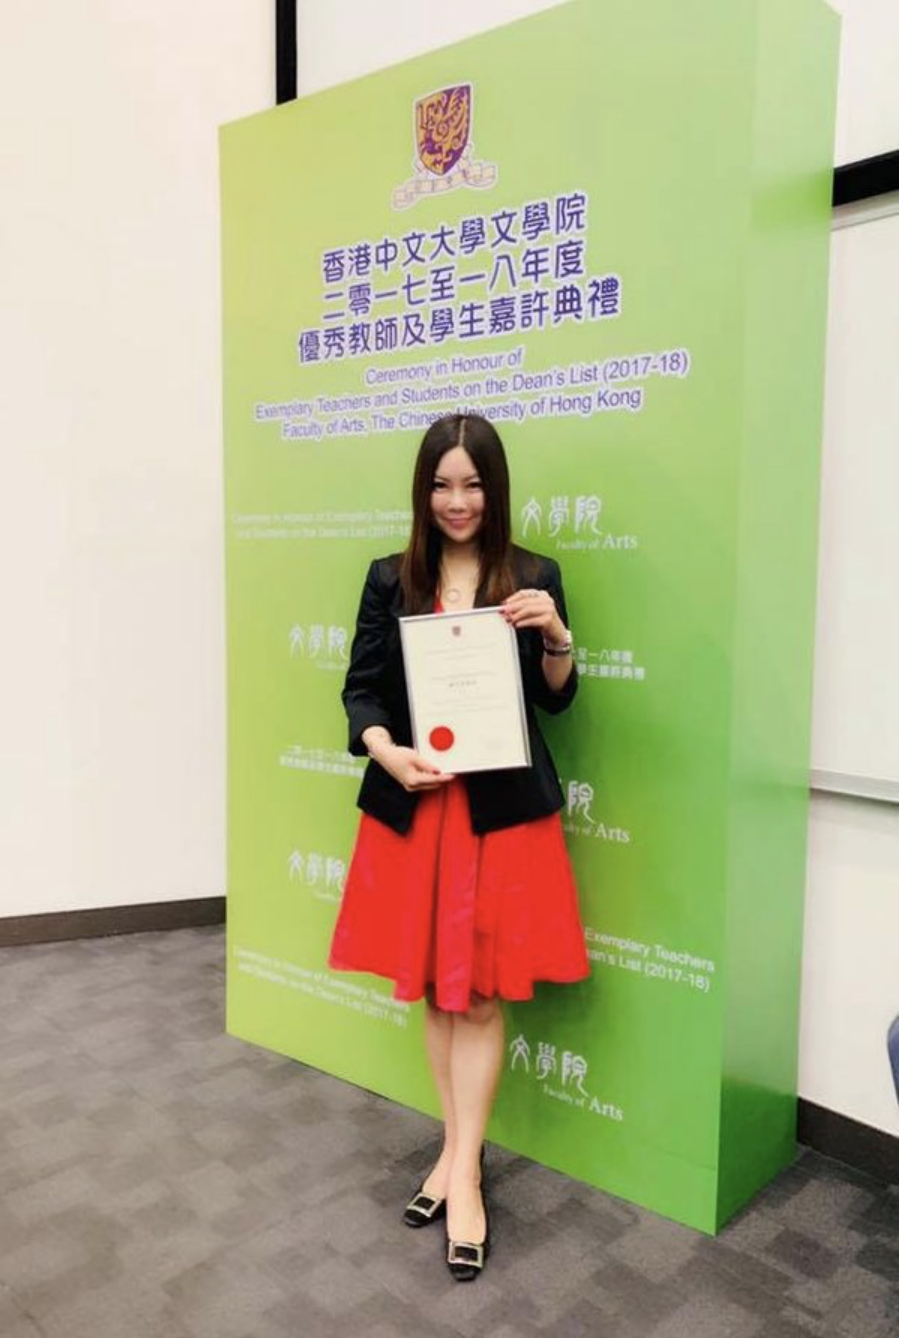 Fanny Fung receiving Outstanding Teaching Award 2018 (Faculty of Arts)